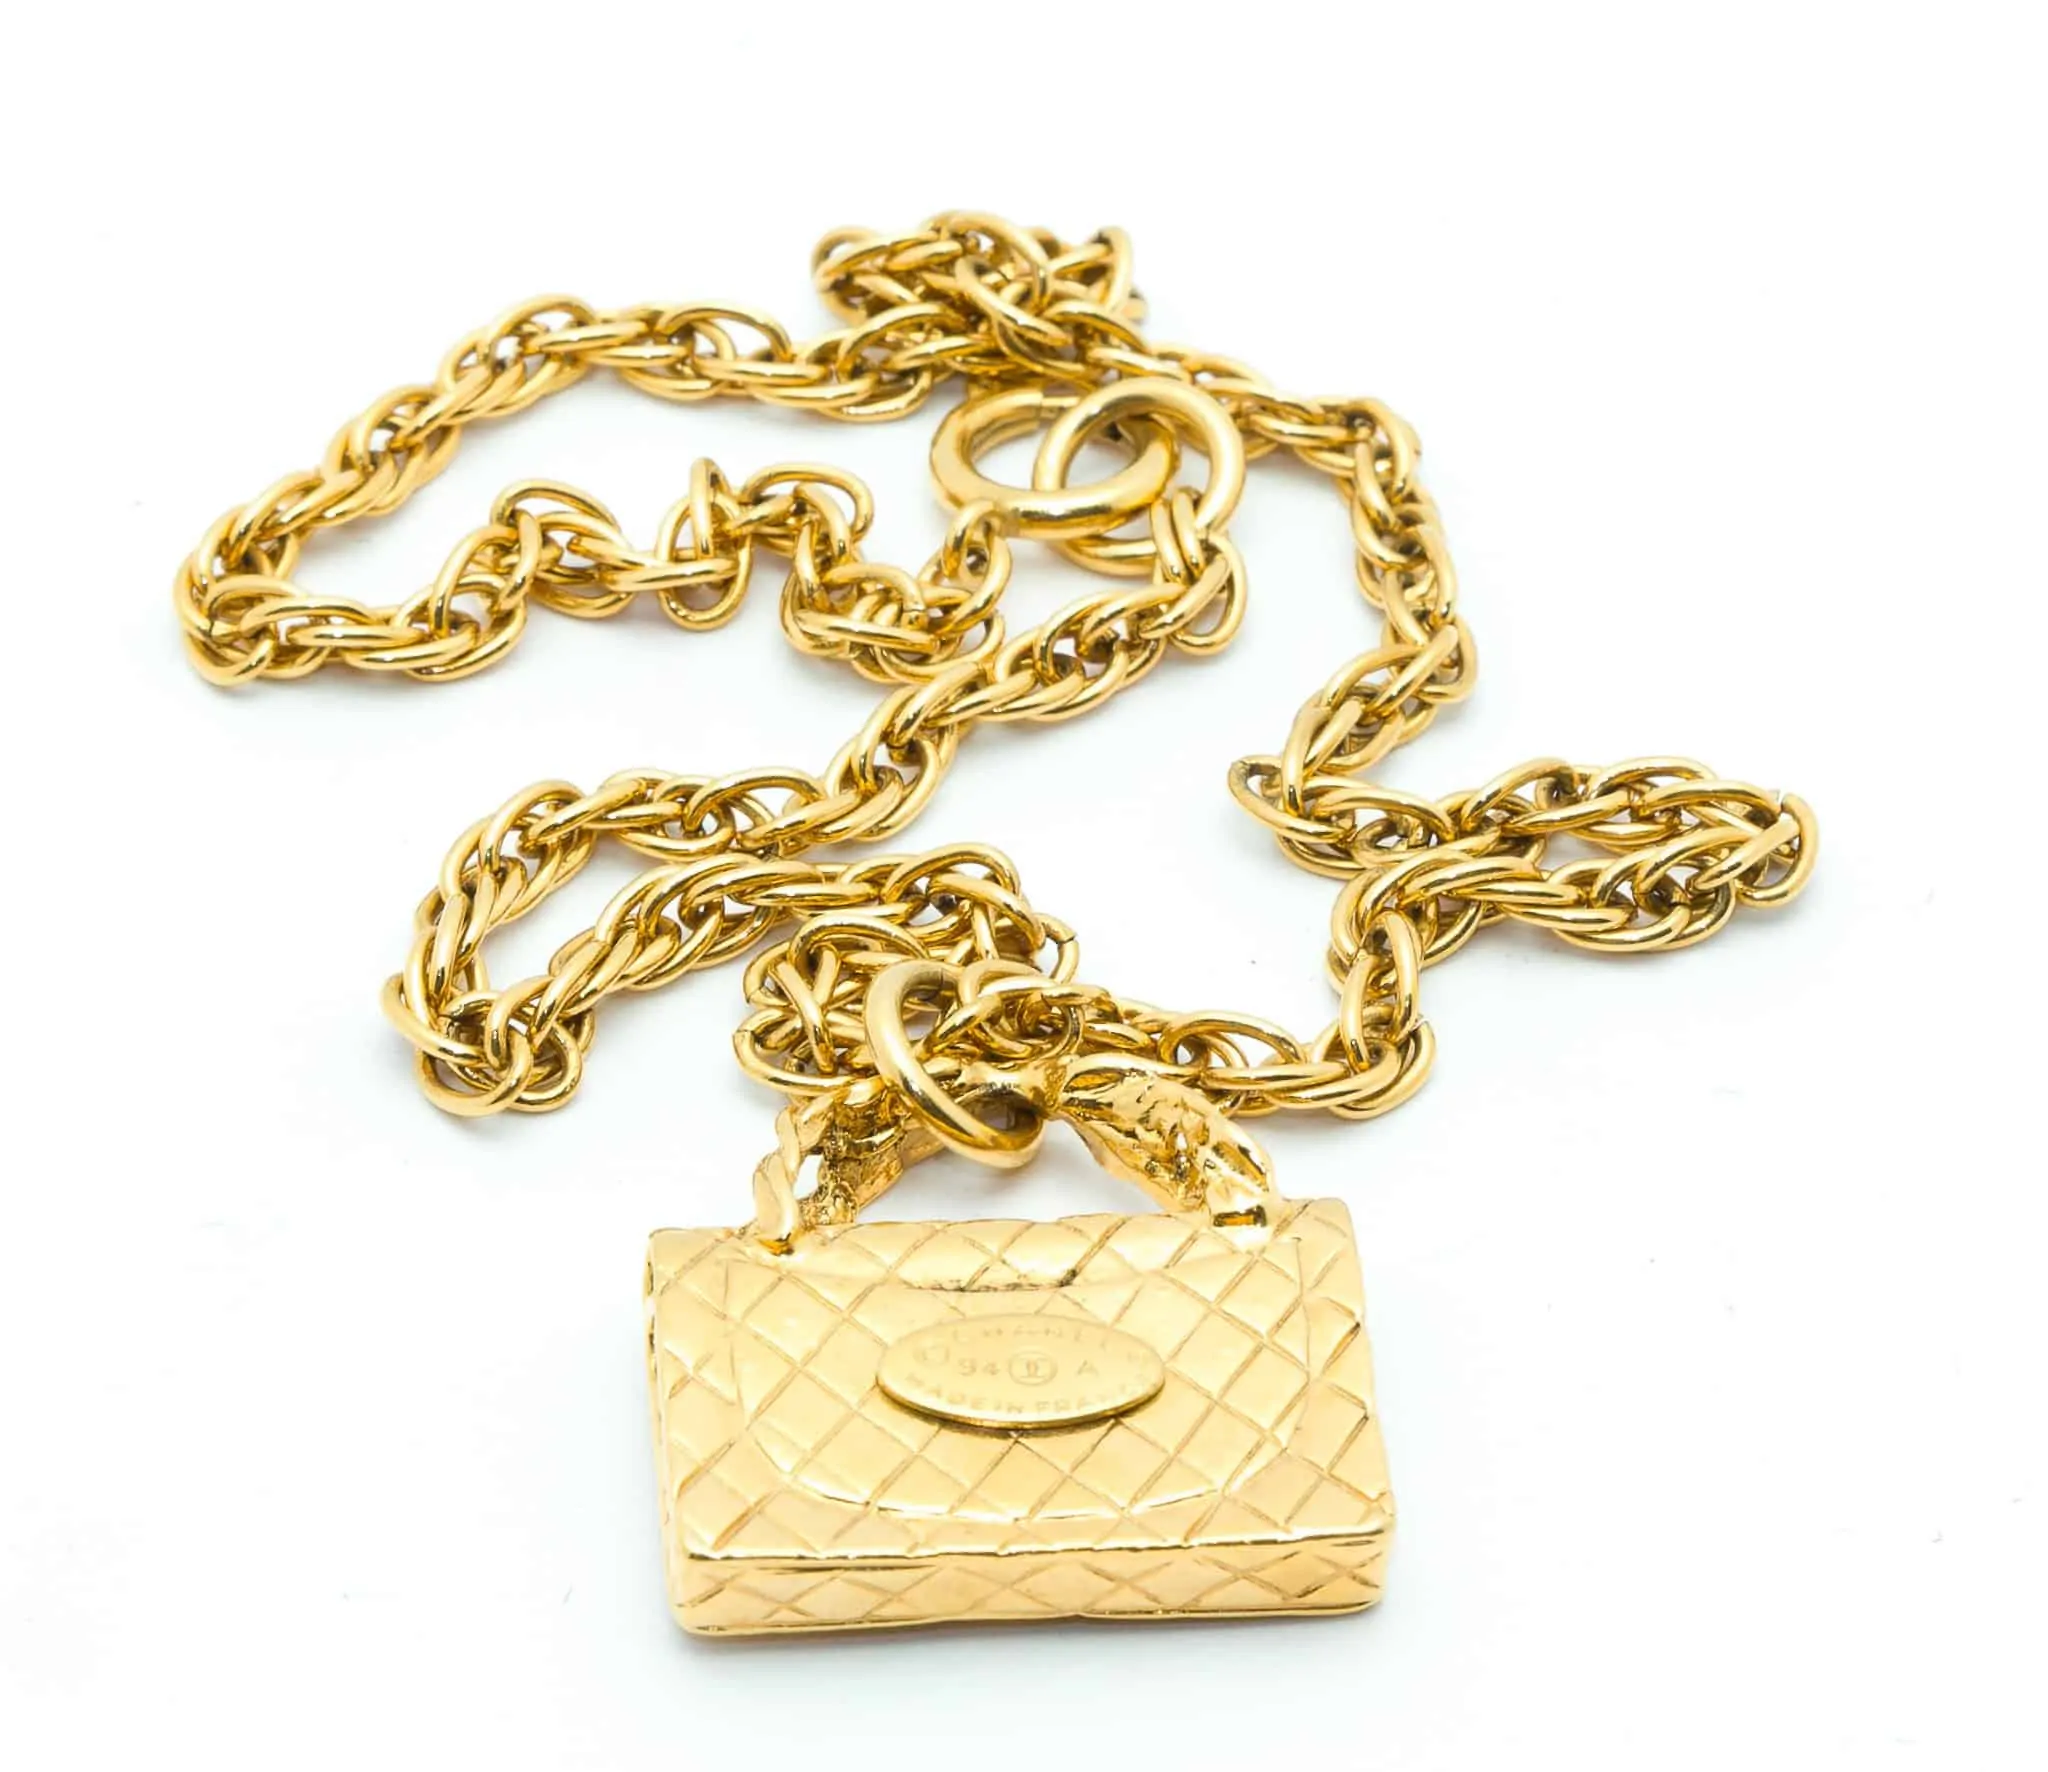 CHANEL Pre-Owned 1994 bag charm chain-link necklace, Gold